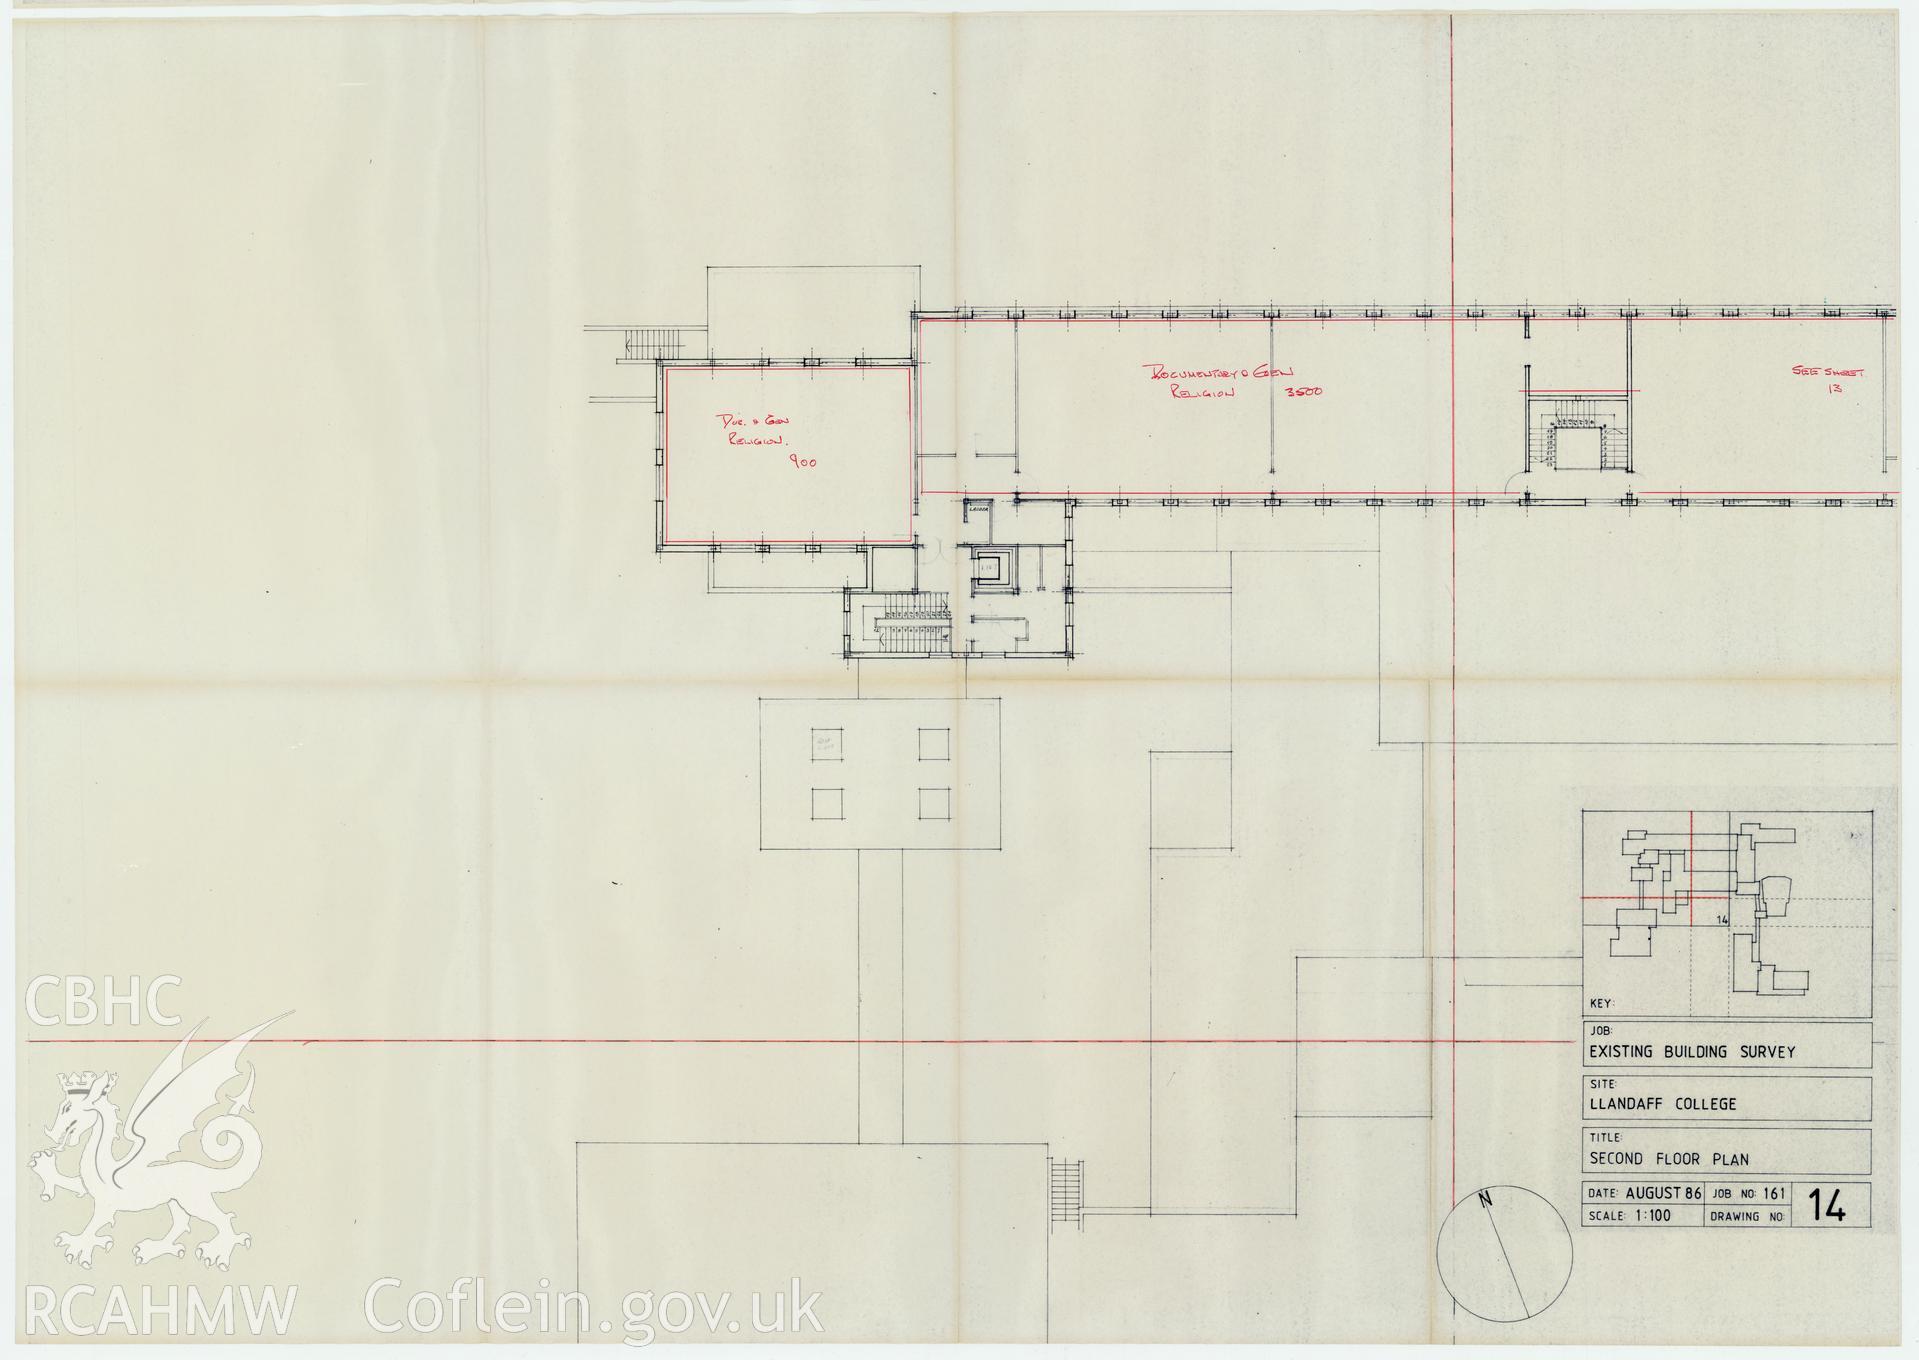 Plan of the second floor of Llandaff College, Cardiff. The existing building survey, August 1986, No 14.